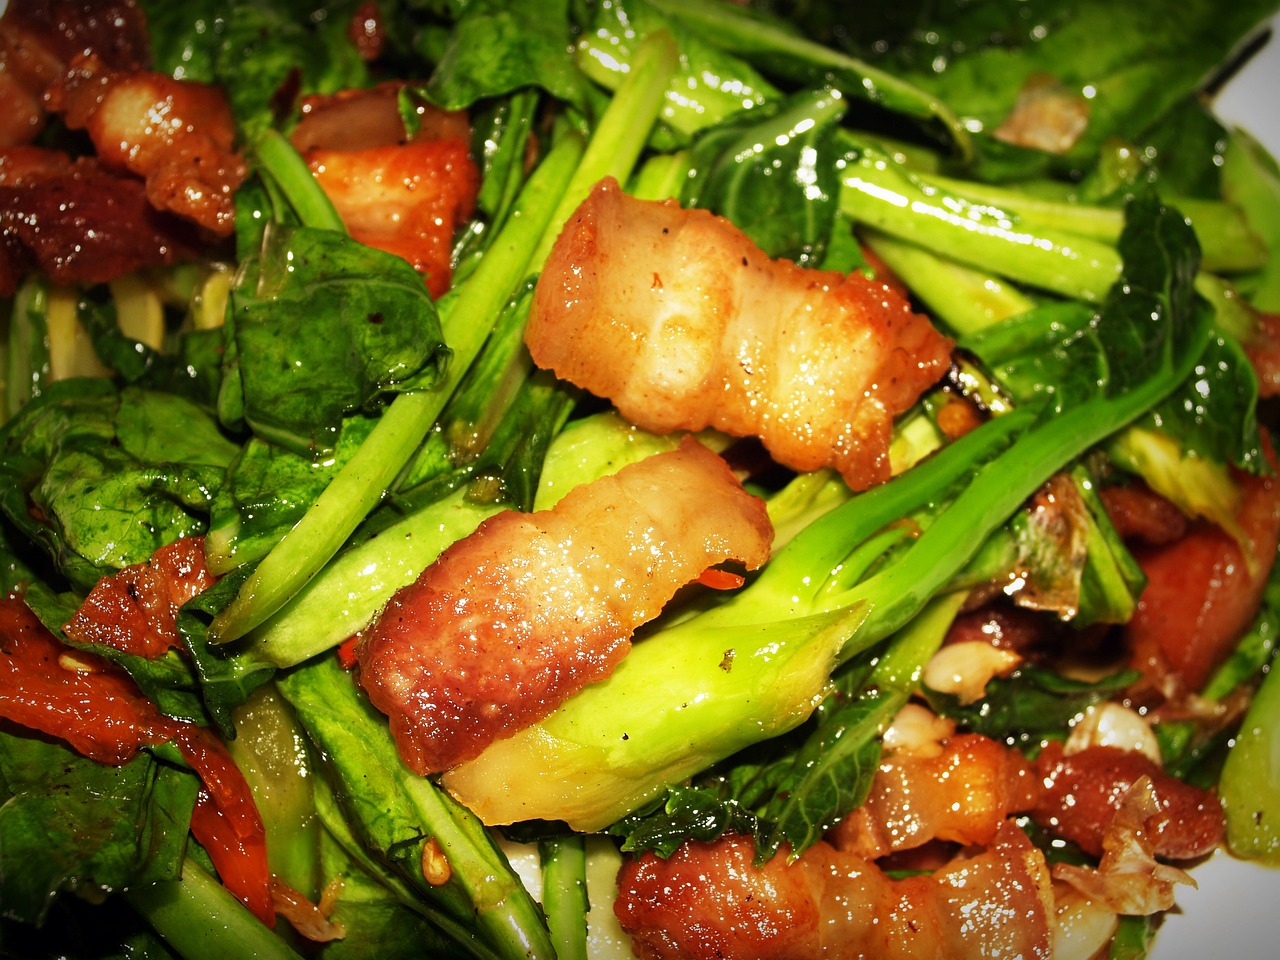 Pork and Stir-Fried Vegetables With Spicy Asian Sauce